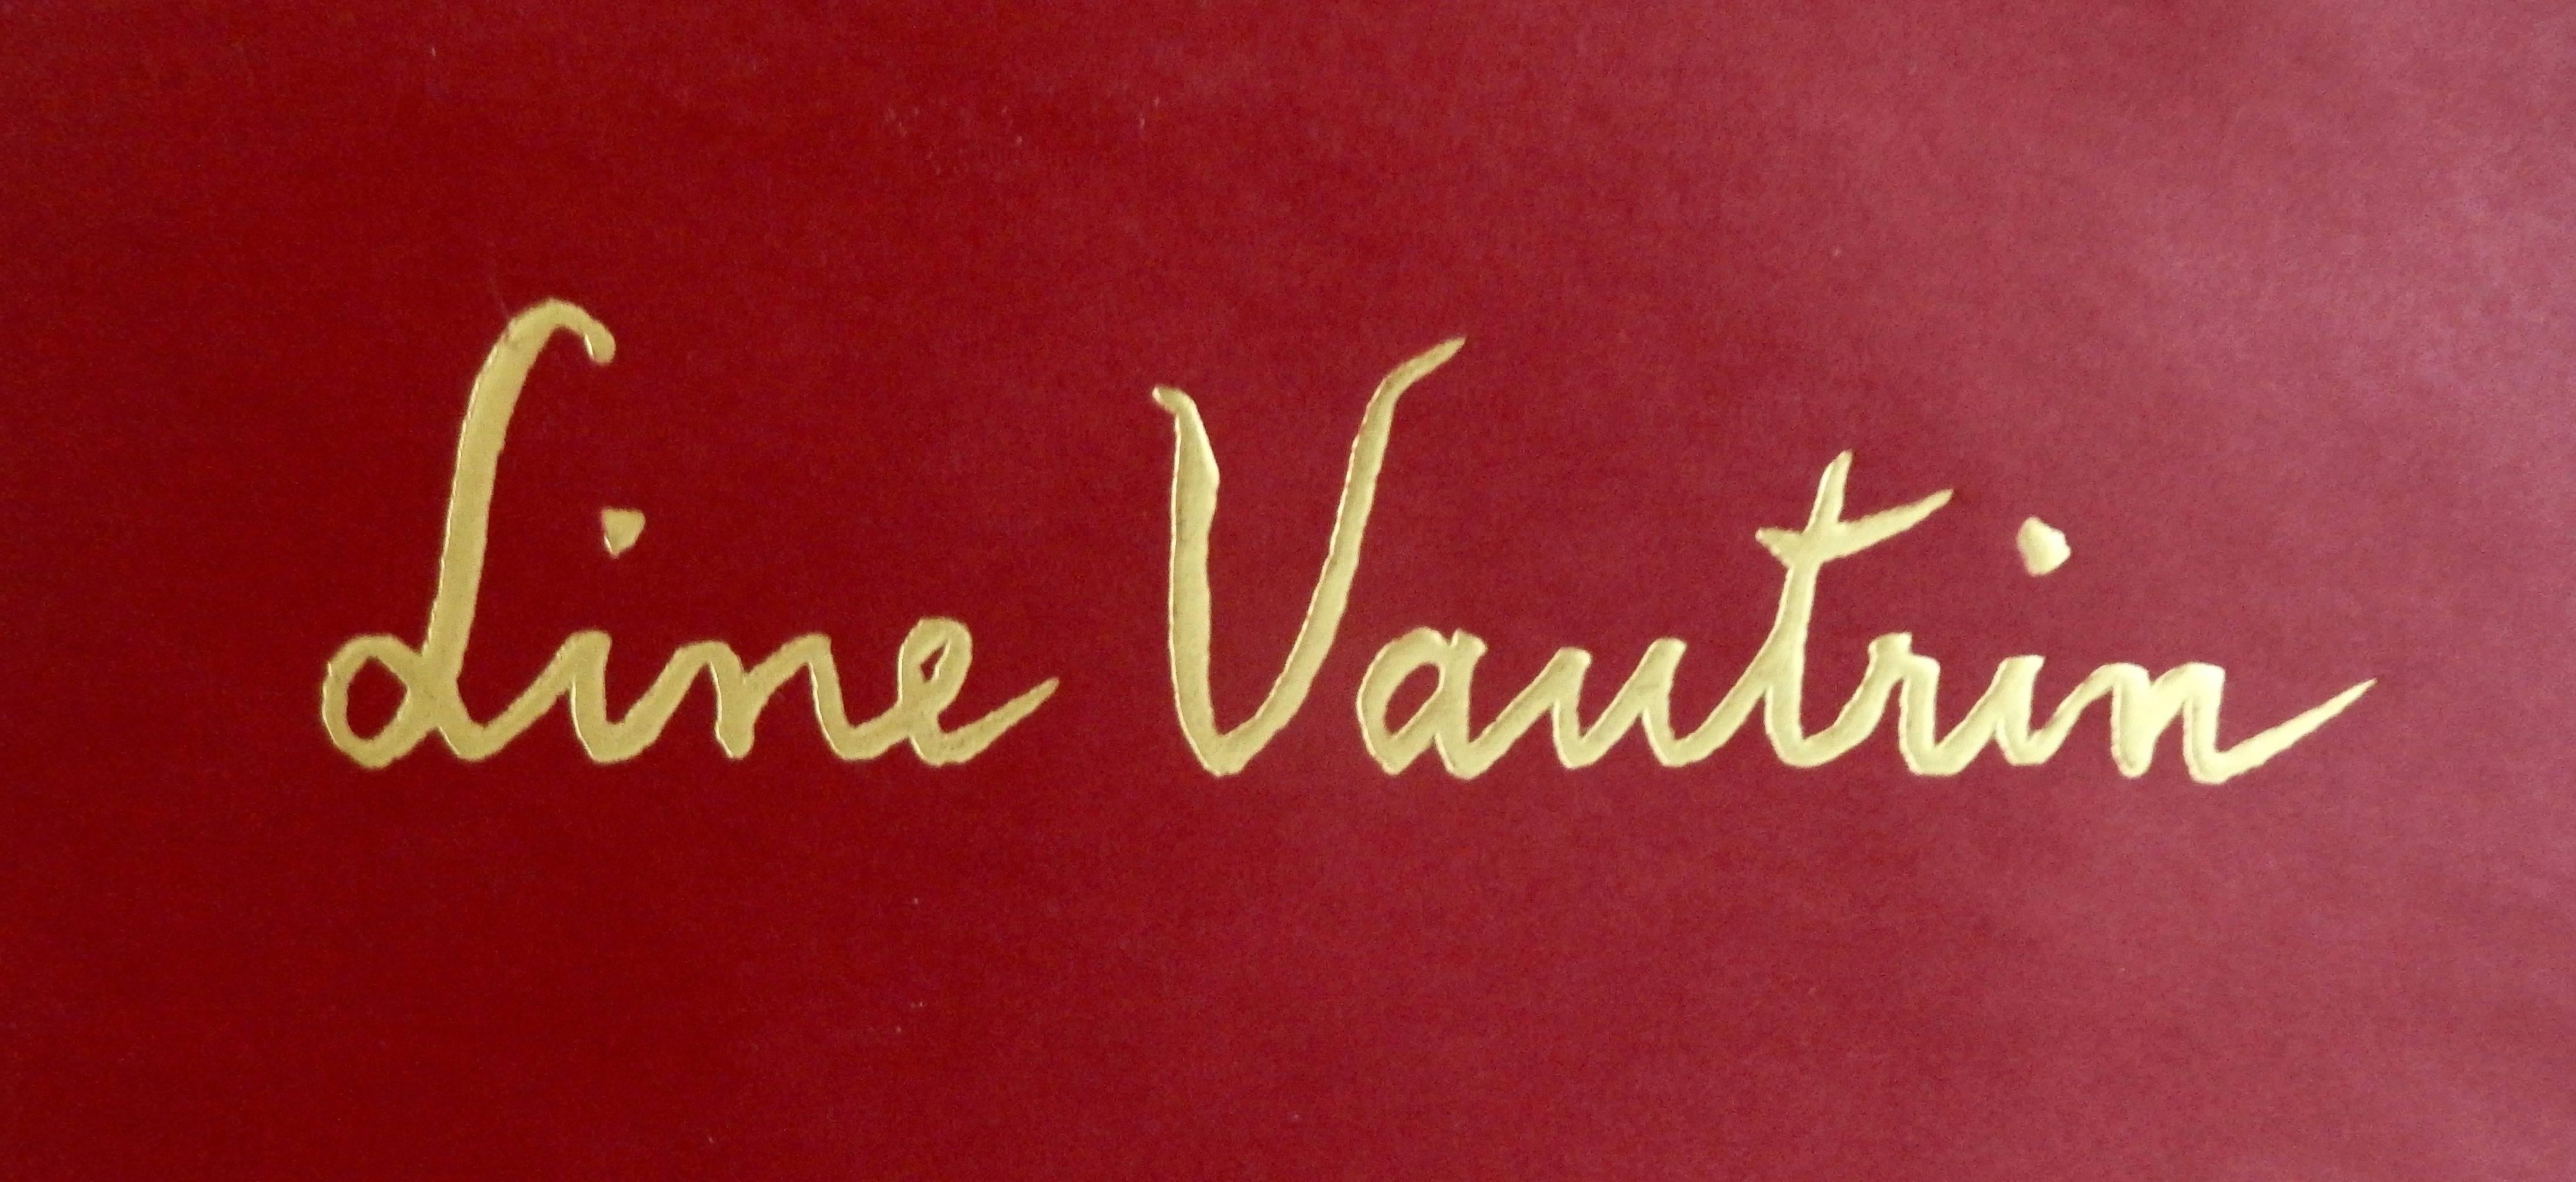 Line Vautrin 2003 Limited Edition Catalog, Poesie in Metall For Sale 2